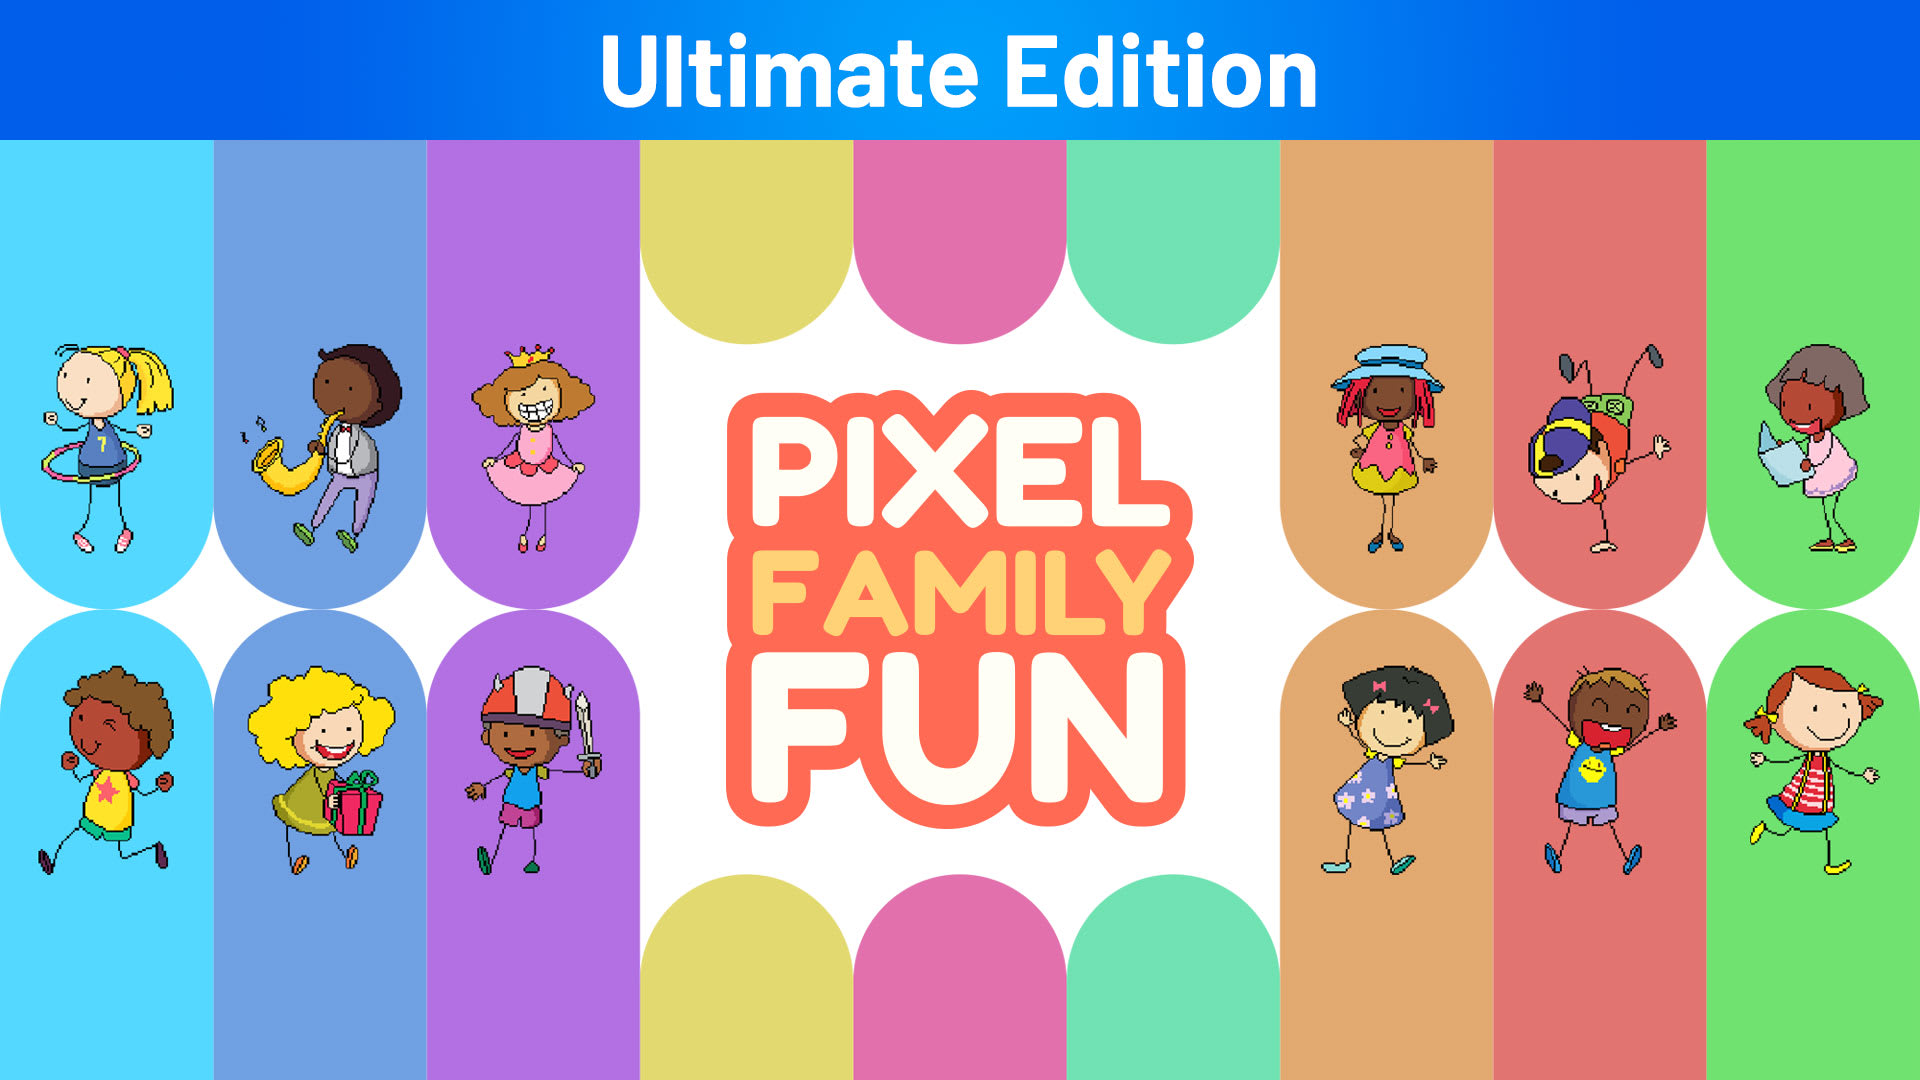 Pixel Family Fun Ultimate Edition 1